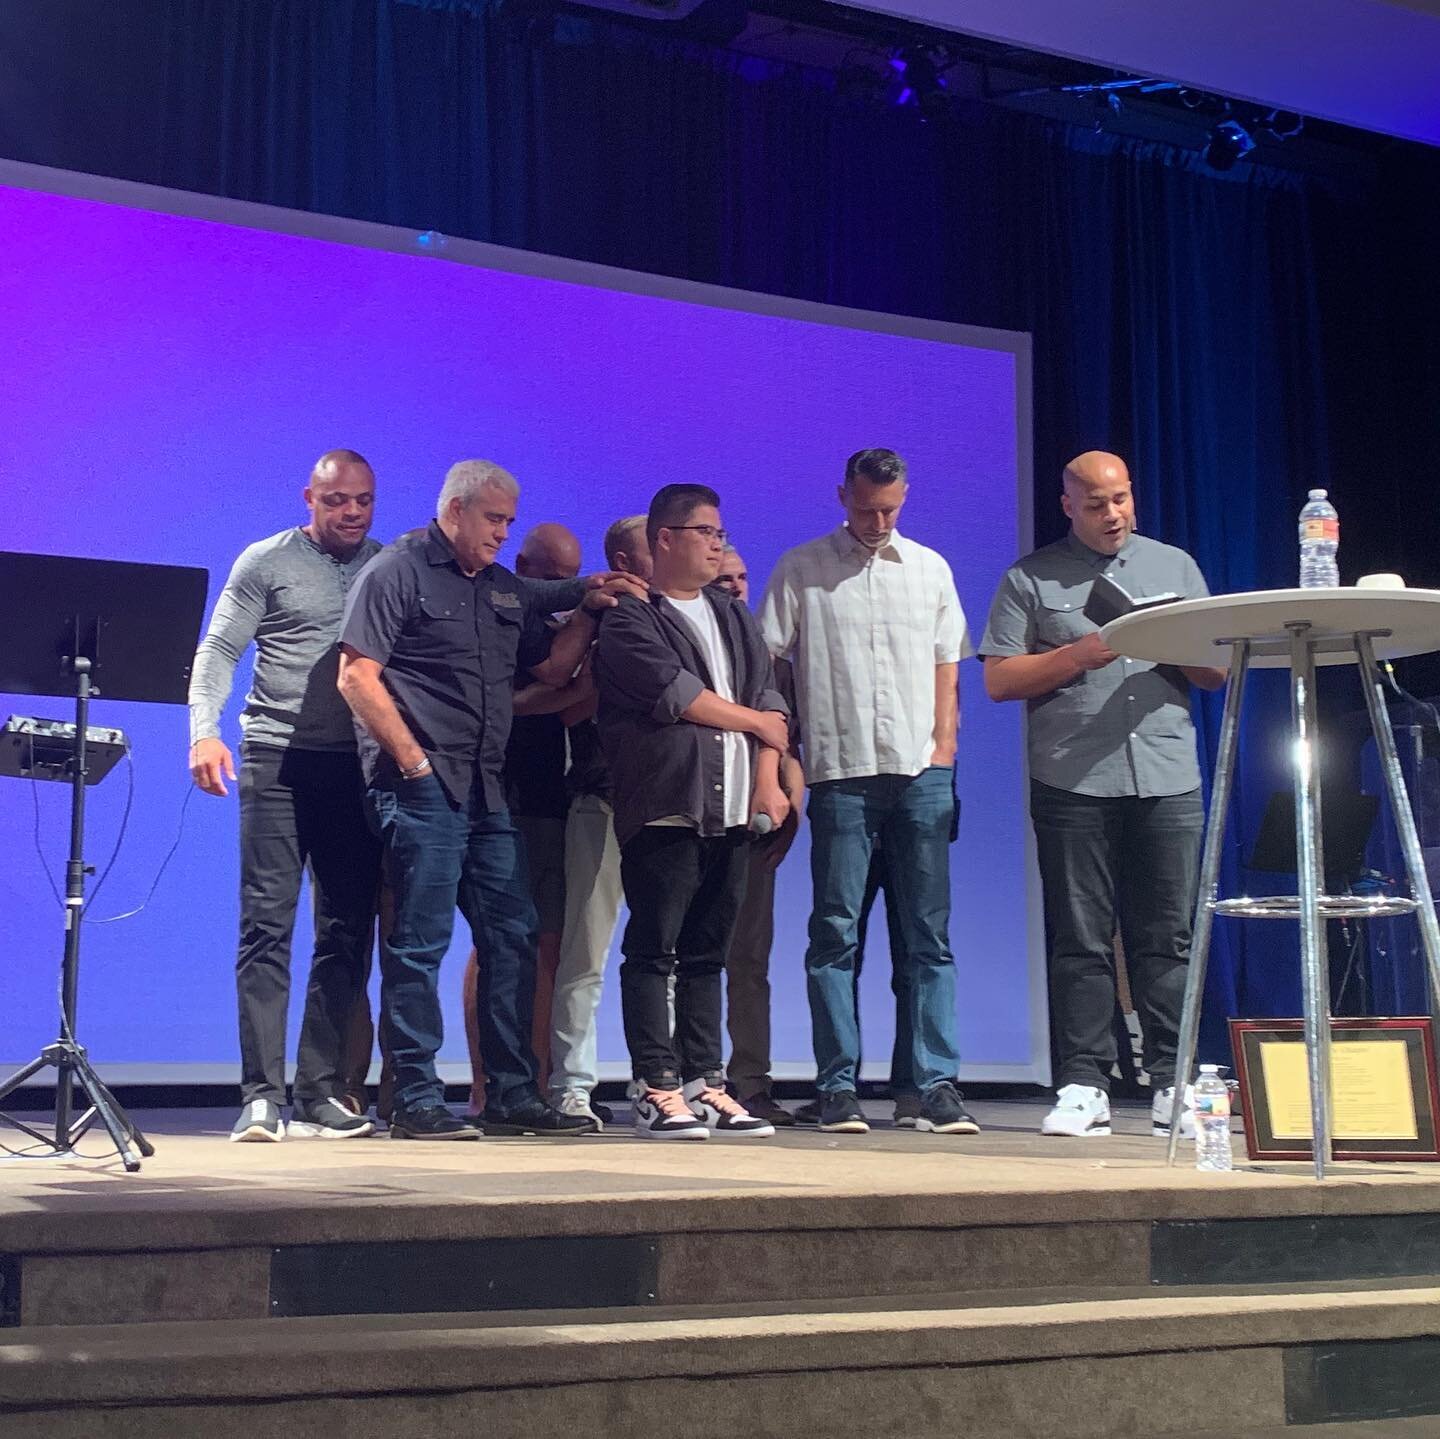 TYLER GOT ORDAINED TODAY!! We&rsquo;re so blessed to have PASTOR Tyler to lead us, teach us, and inspire us. God has done an amazing work in Tyler&rsquo;s life and is continuing to do so. We&rsquo;re excited to see how the Spirit continues to work!